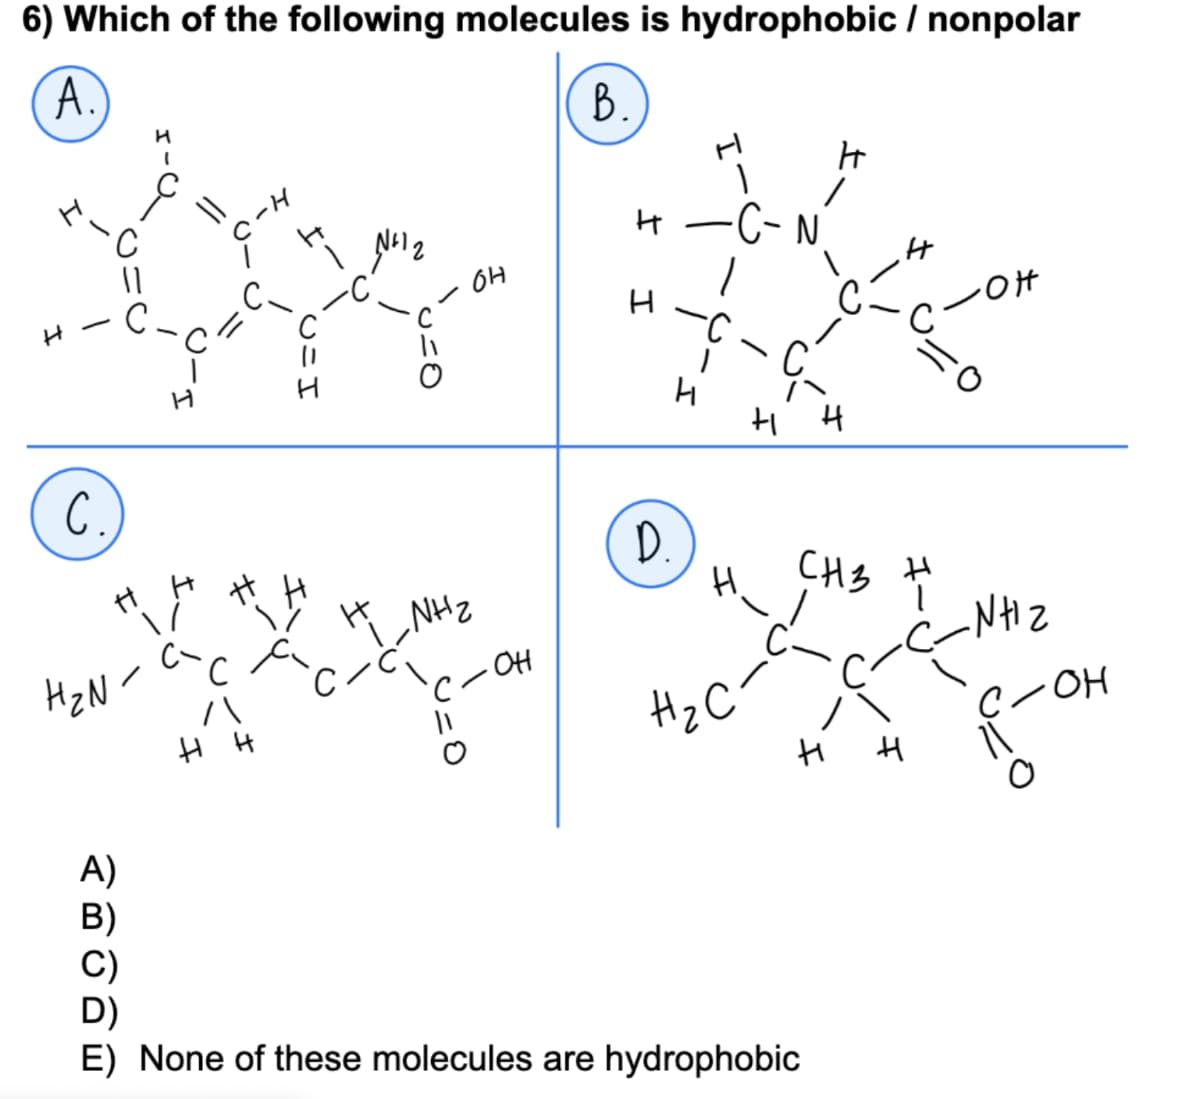 6) Which of the following molecules is hydrophobic / nonpolar
A.
B.)
C.
"H
(_
H₂N-
H
A)
H-J
с
/\
I.
# H
T
H
U=O
NH₂
с
Î
· OH
н
H
D.
•C- N'
H.
H₂C
ç
HH
H
CH3
н
E) None of these molecules are hydrophobic
H
C-OH
H
ال ہے
H
C/OH